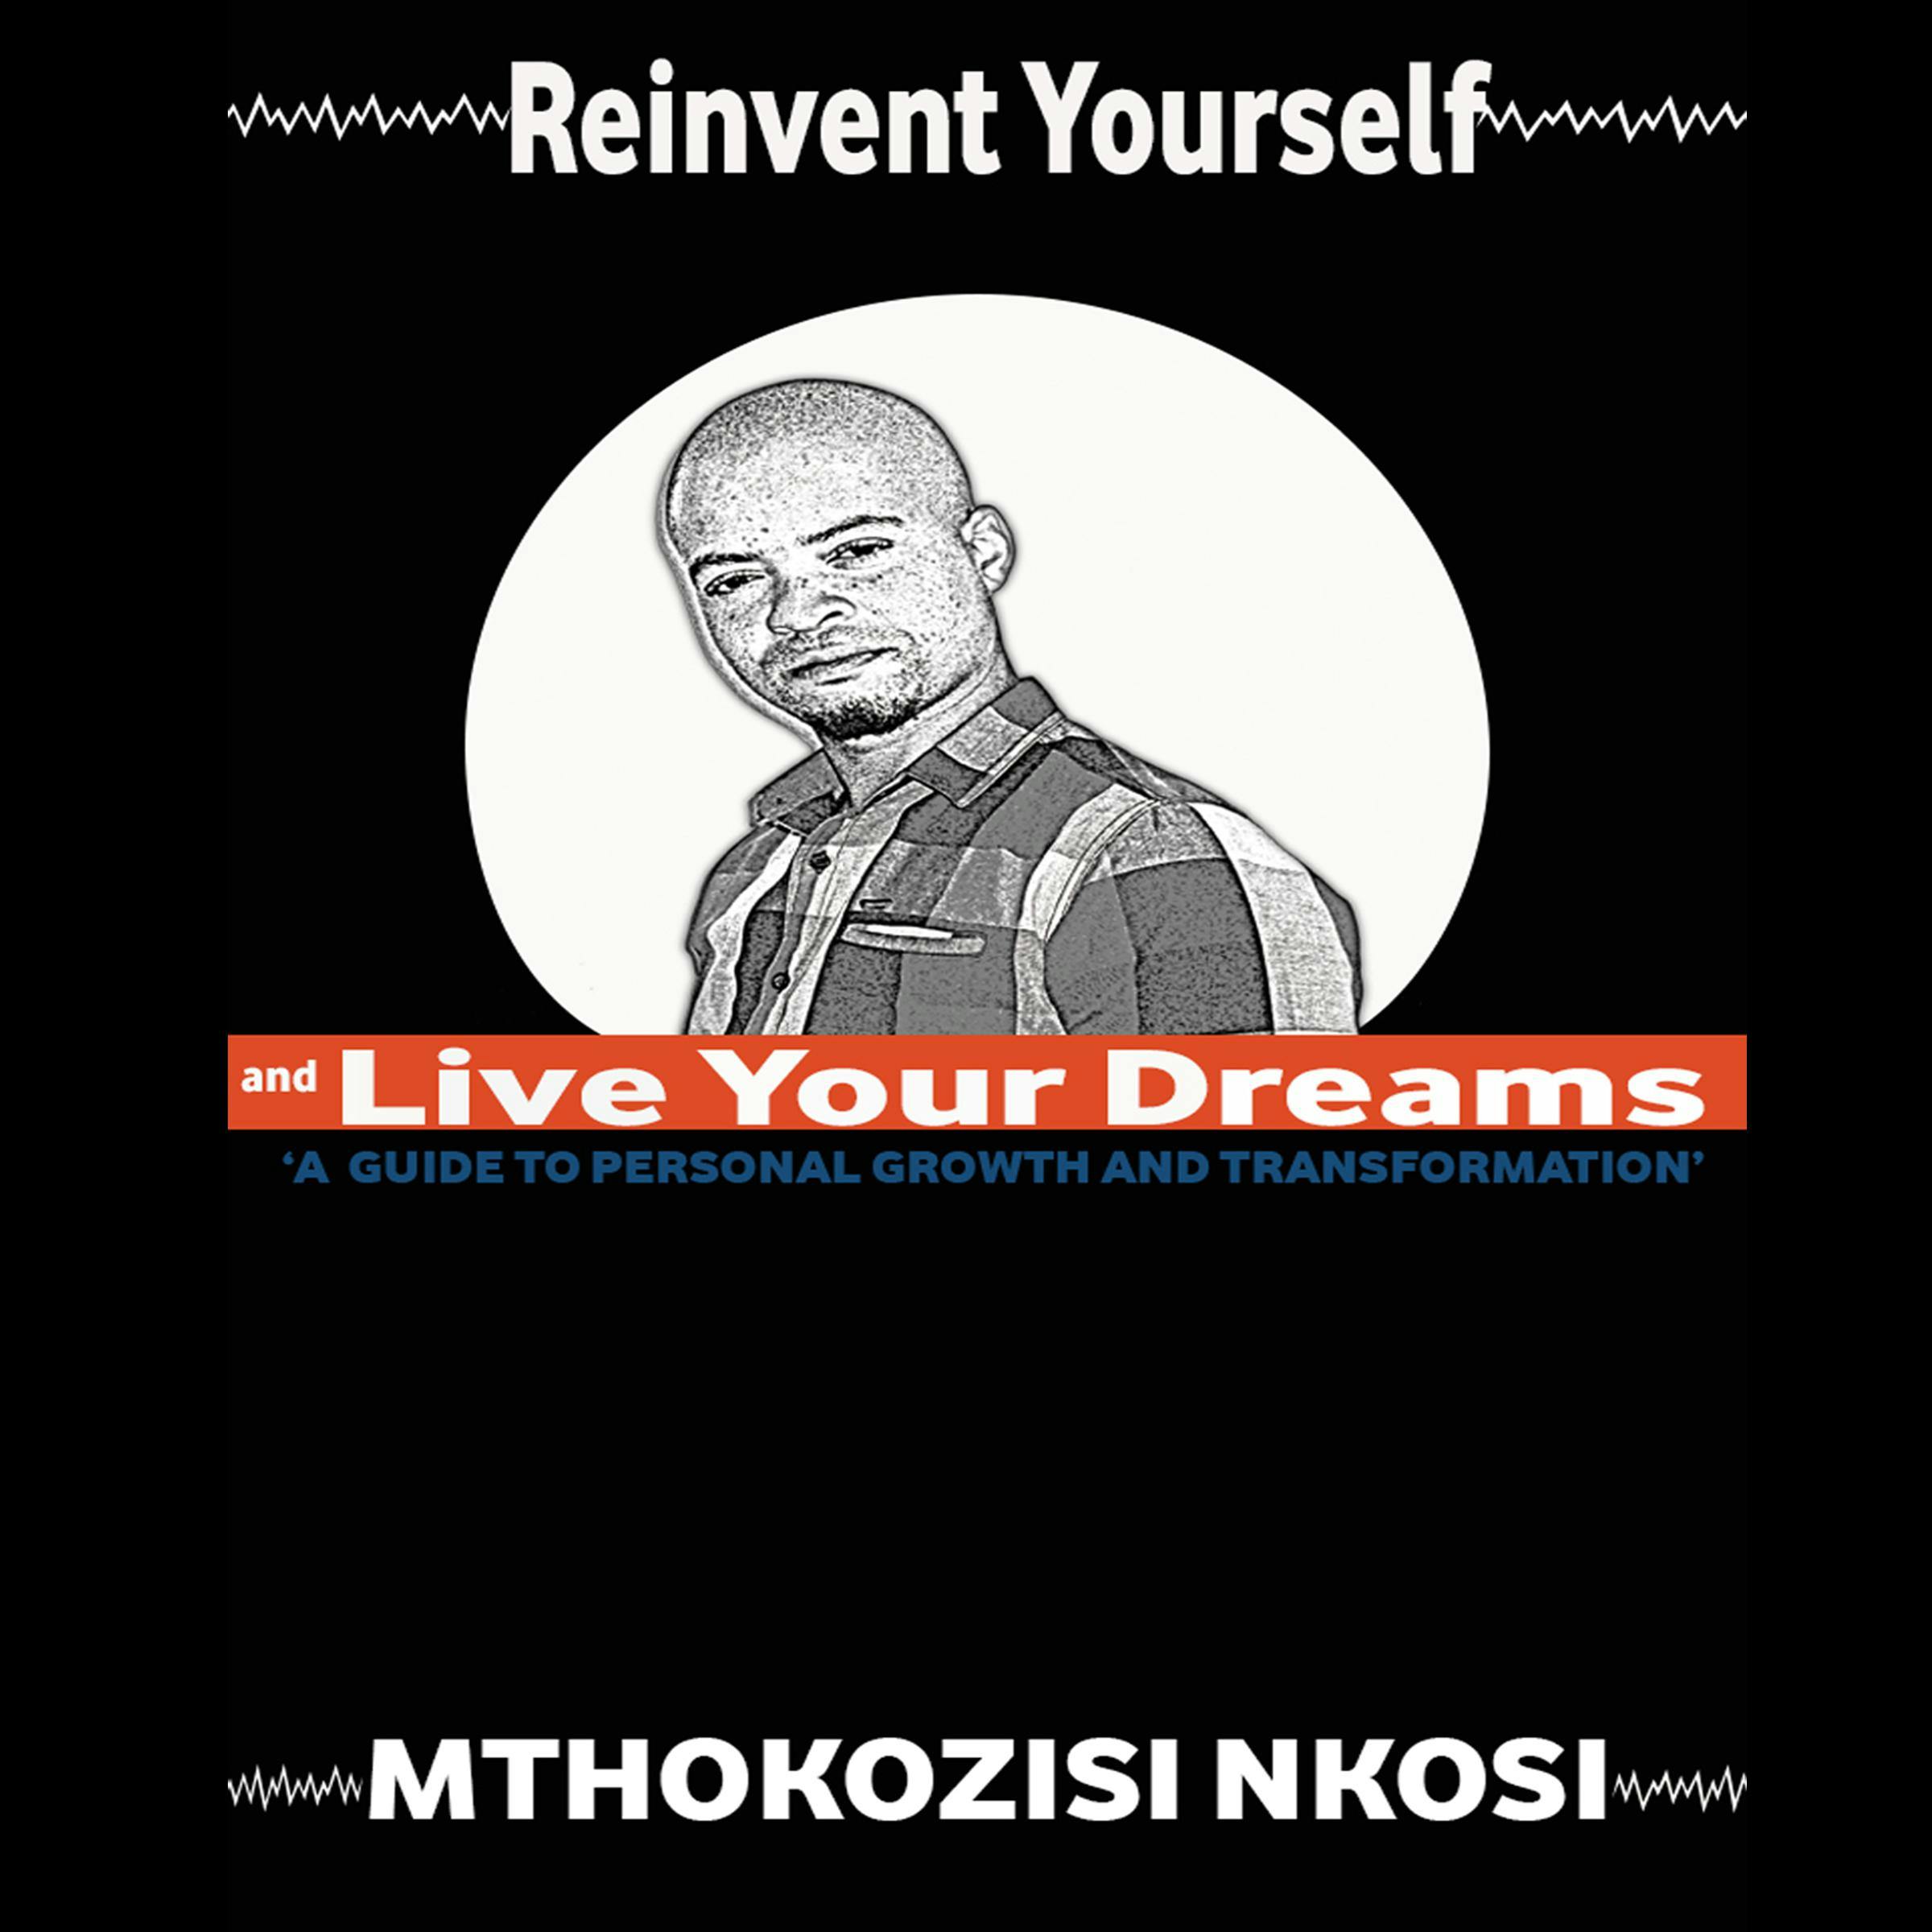 Reinvent Yourself and Live Your Dreams: A guide to personal growth and transformation - Mthokozisi Nkosi